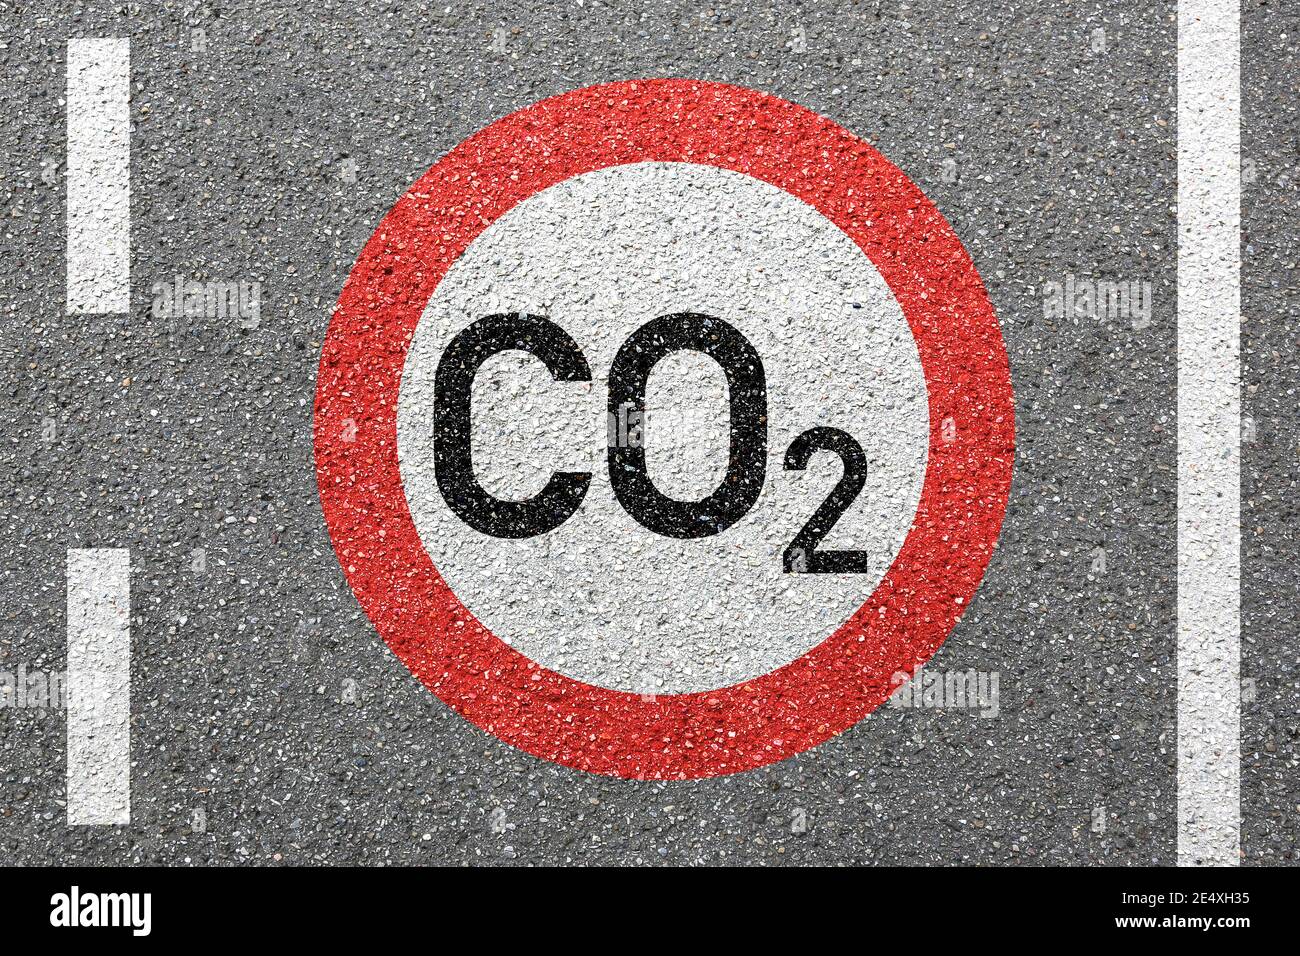 CO2 emissions emission Carbon dioxide air pollution reduction driving ban zone concept Stock Photo